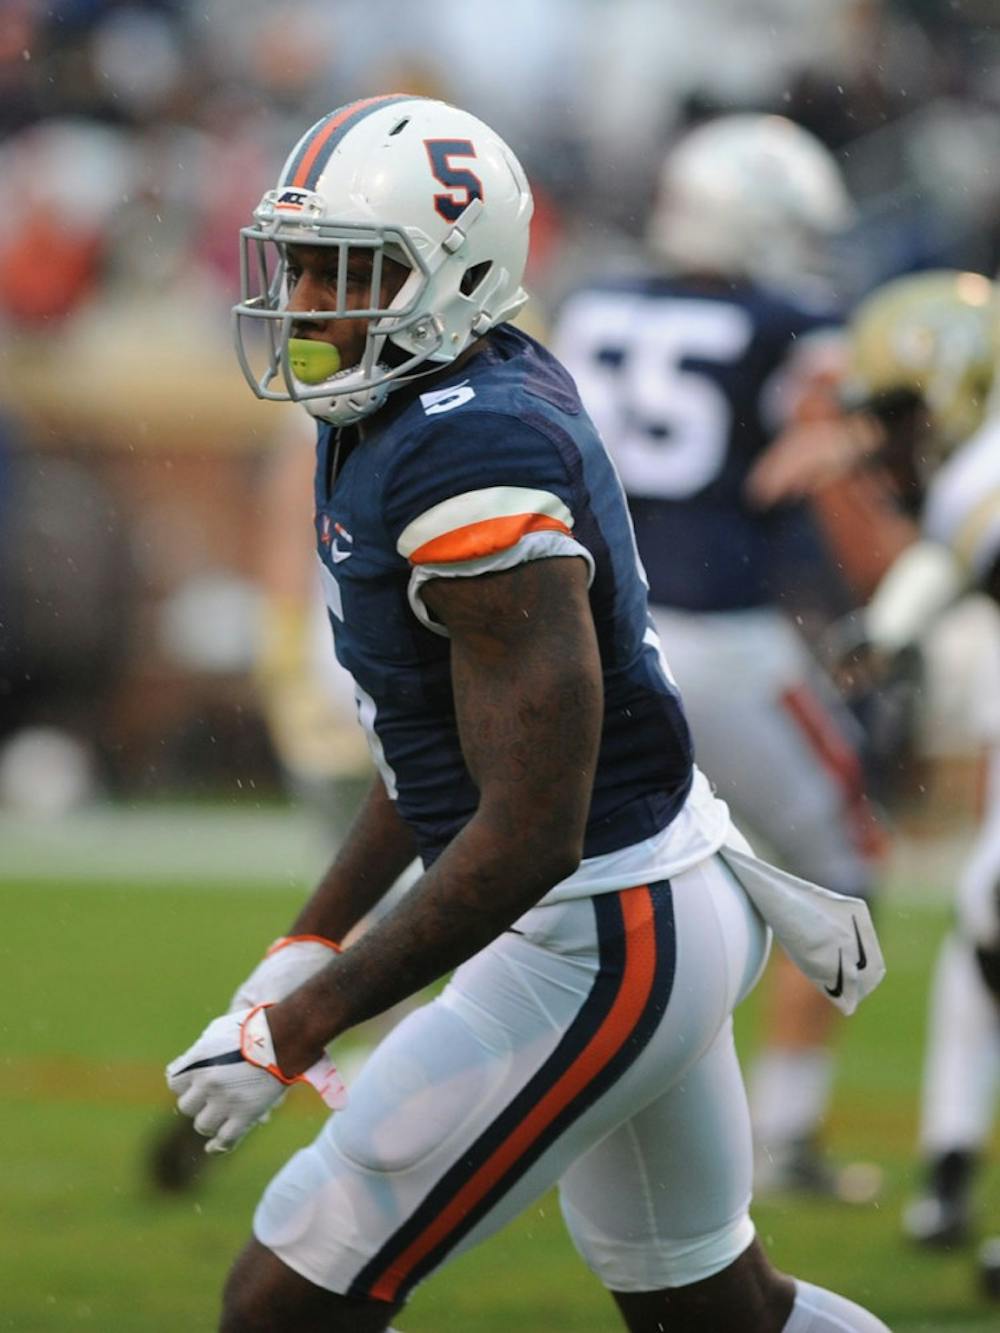 <p>Senior wide receiver Doni Dowling will need to step up against Miami’s tough secondary and keep Virginia's passing game alive this Saturday.&nbsp;</p>